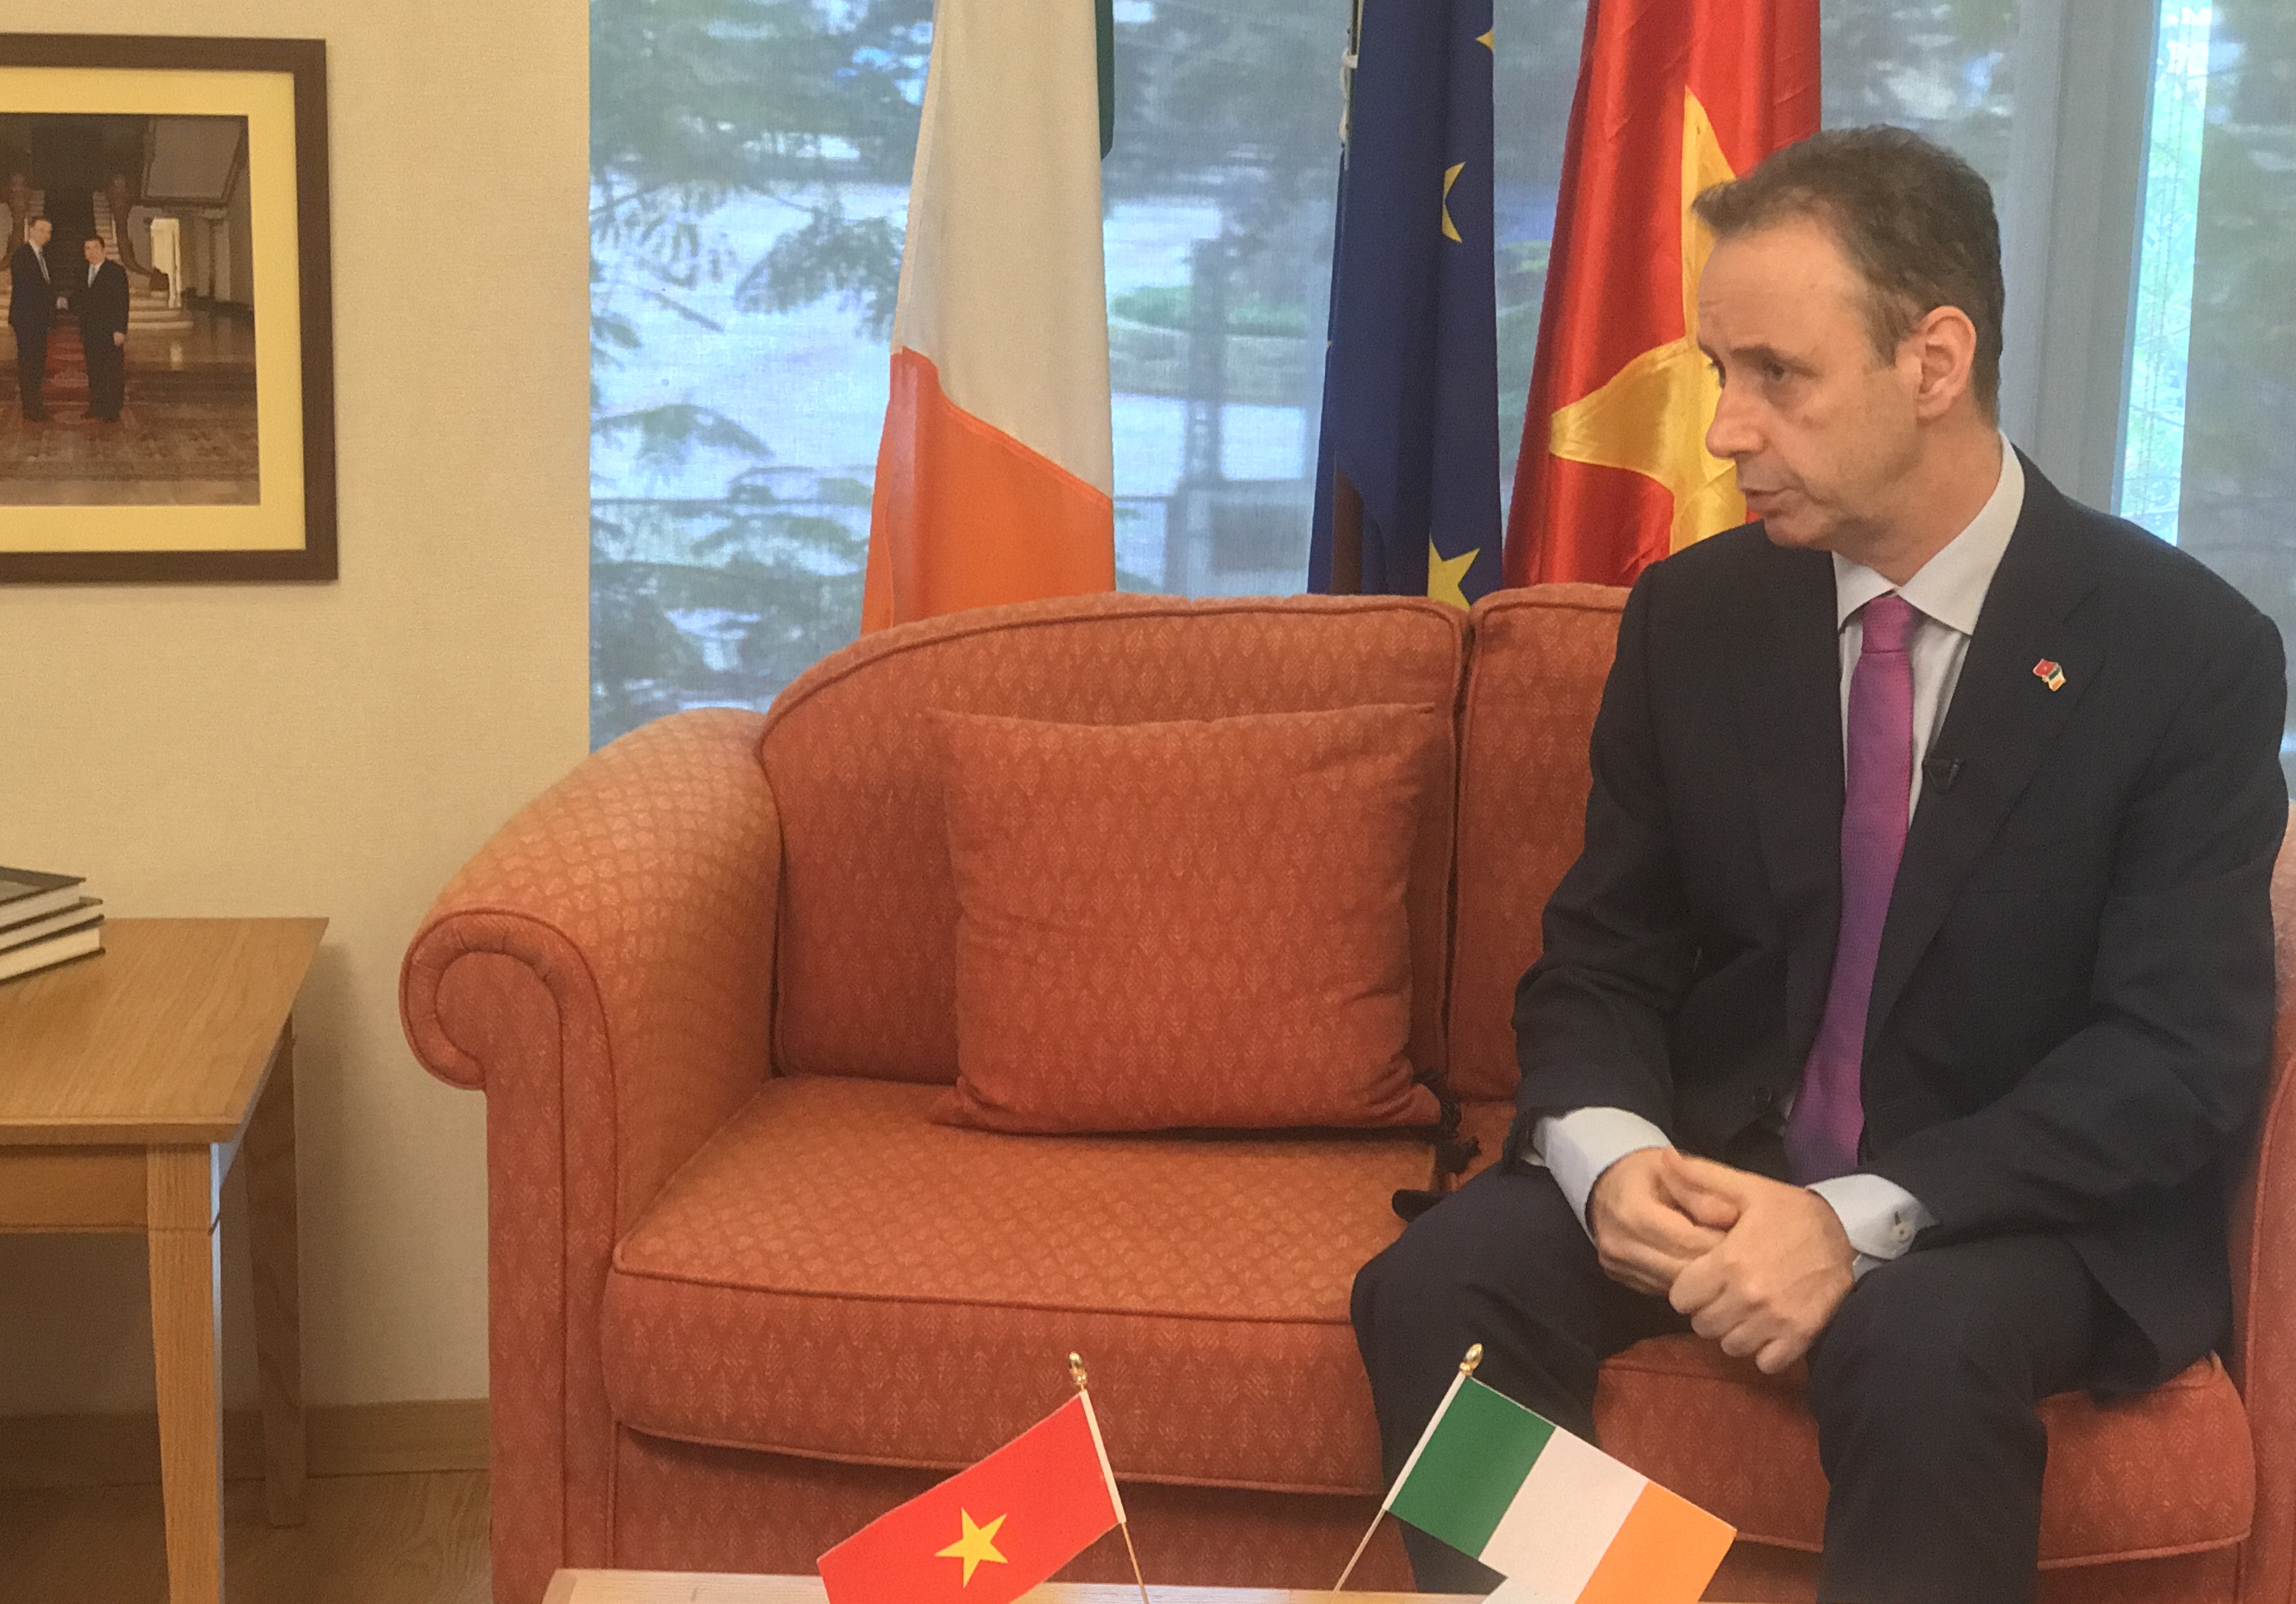 EVFTA will bring great opportunities for Vietnam and Ireland